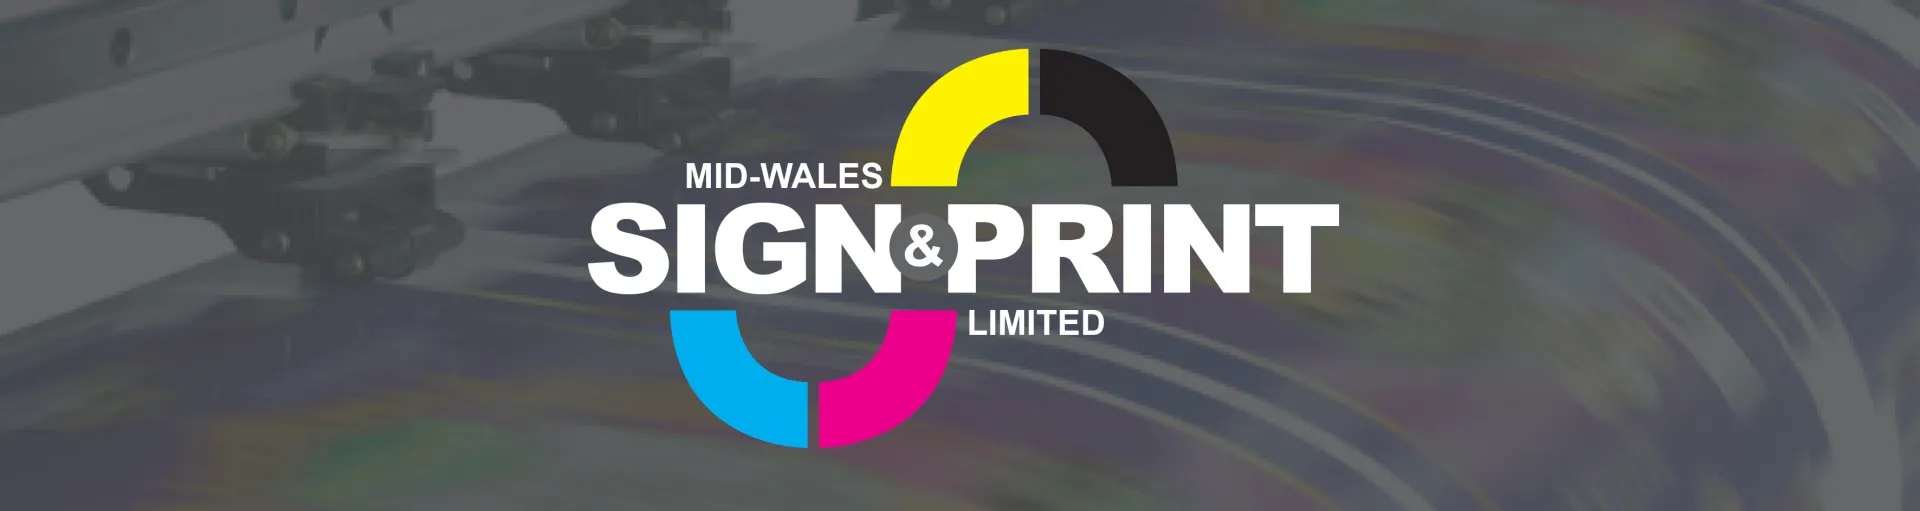 Mid Wales Sign and Print Limited